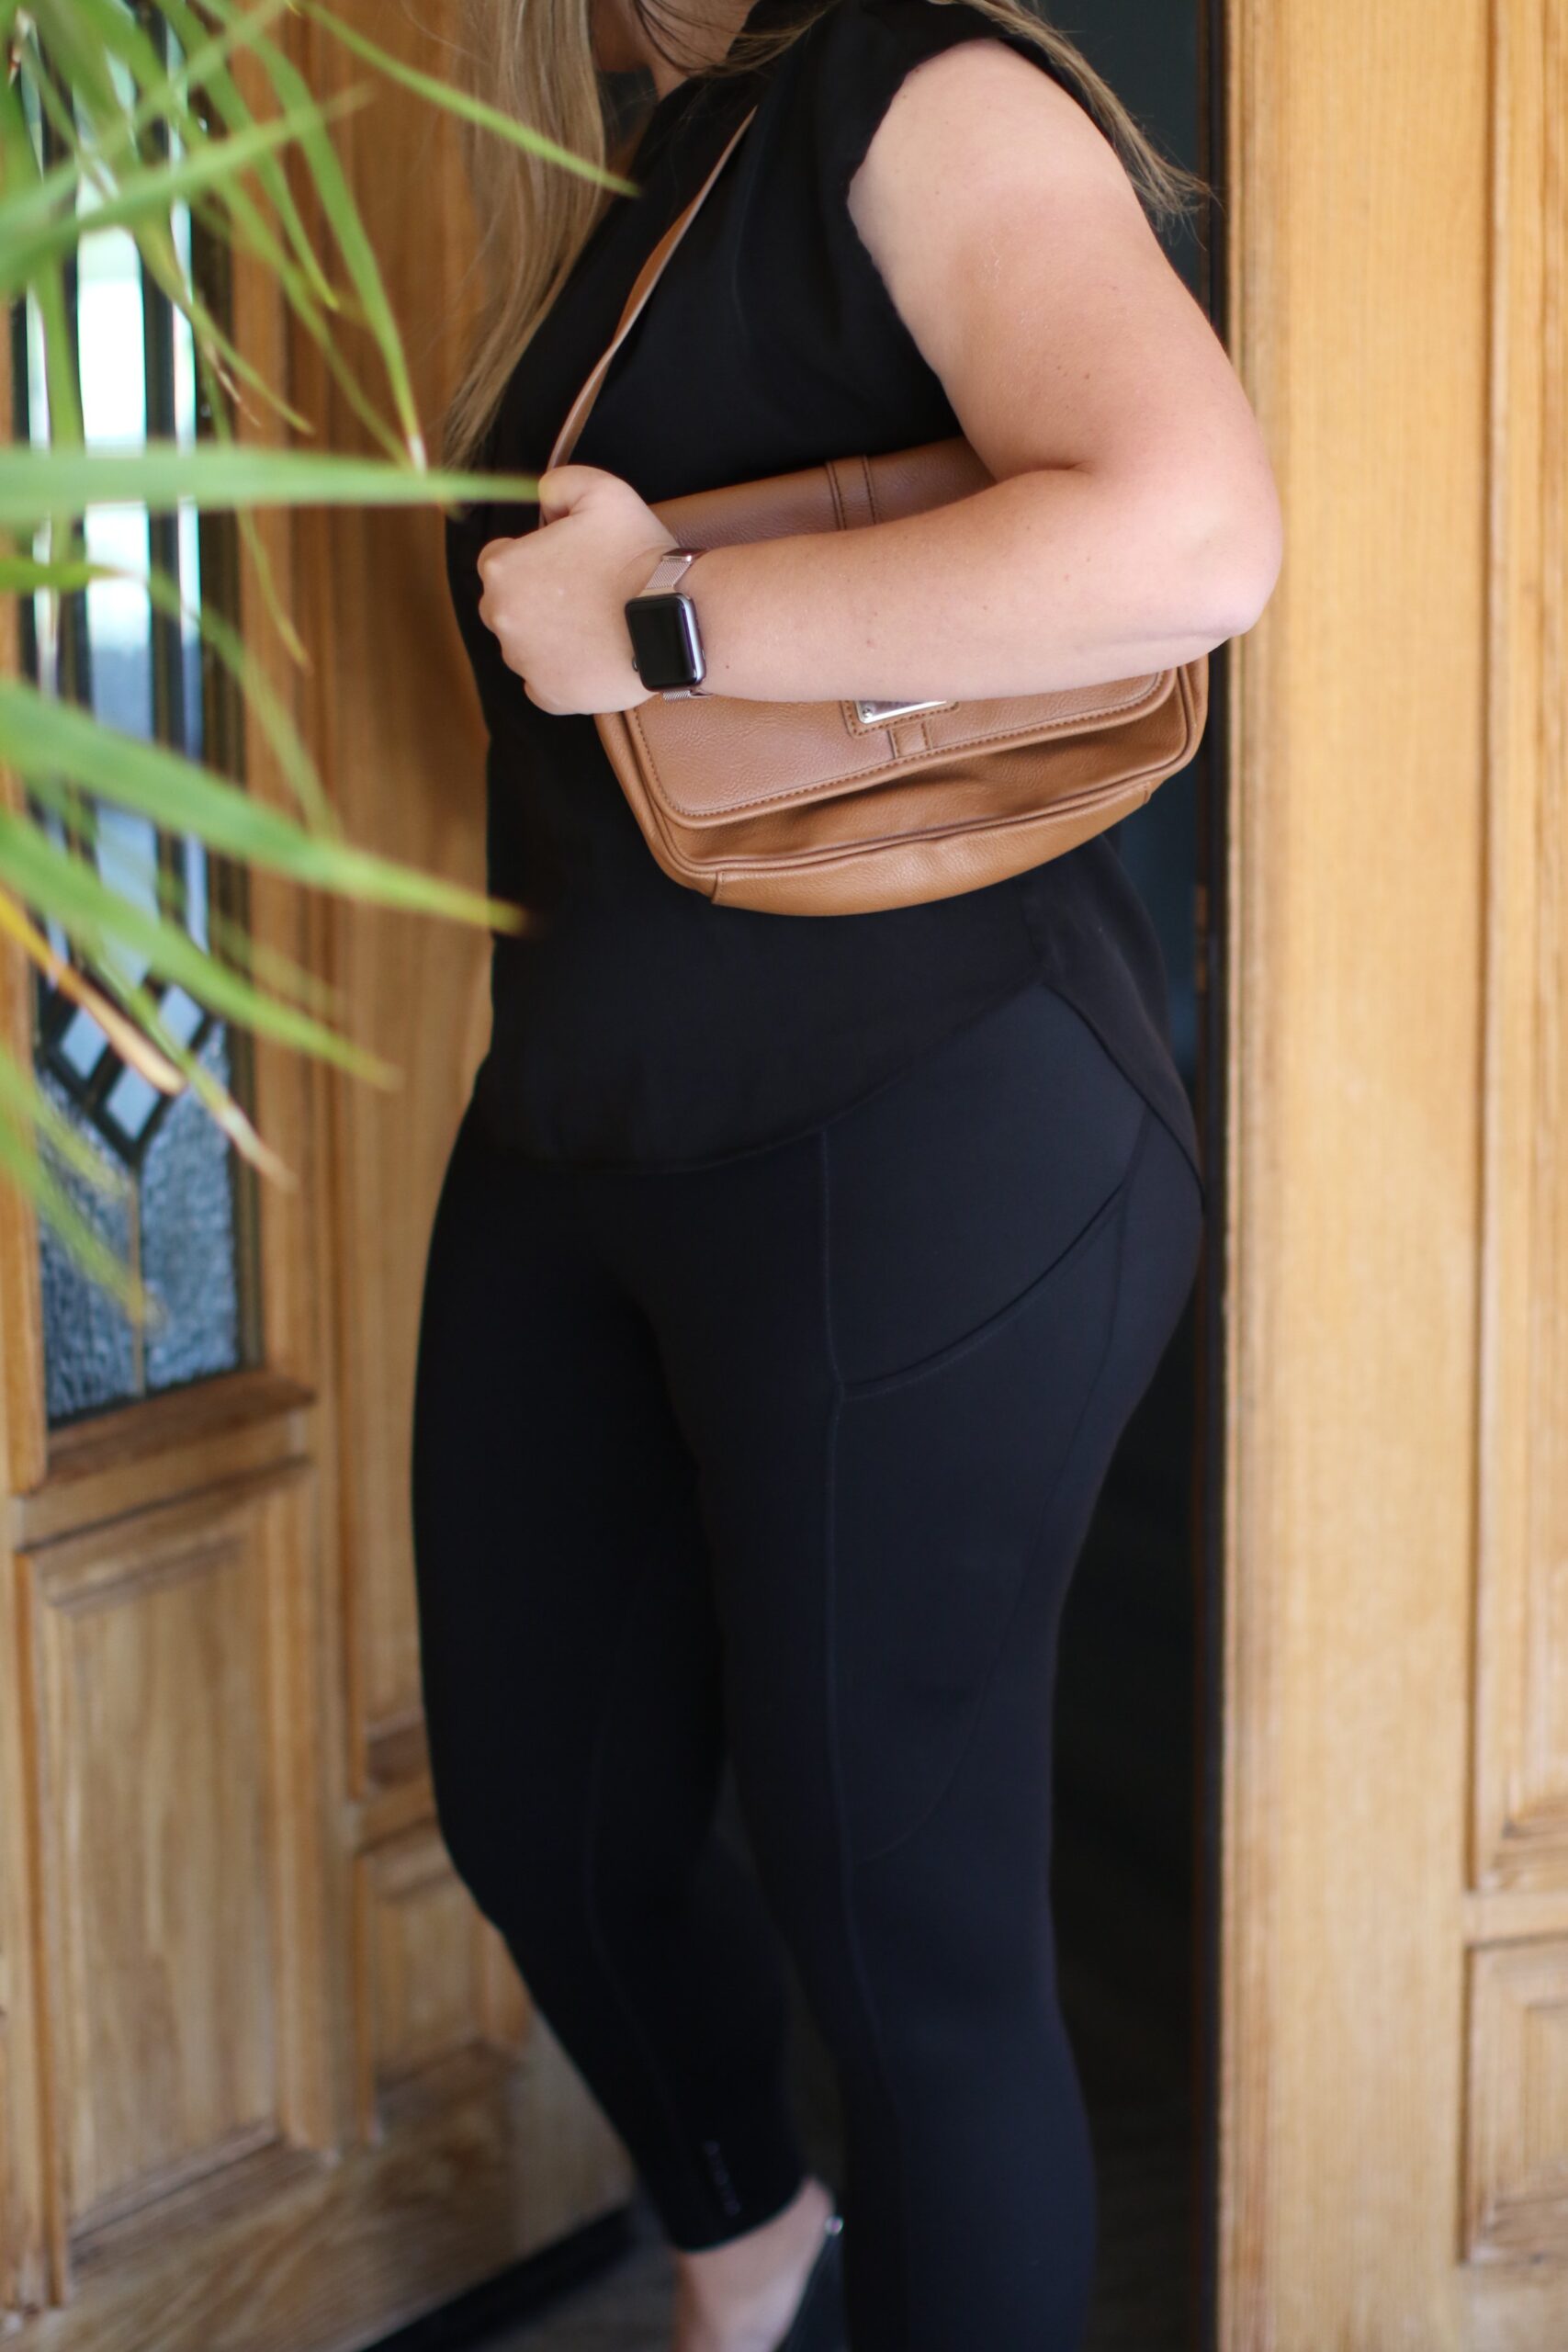 Woman wearing a black blouse and black leggings going outside and closing a brown door 